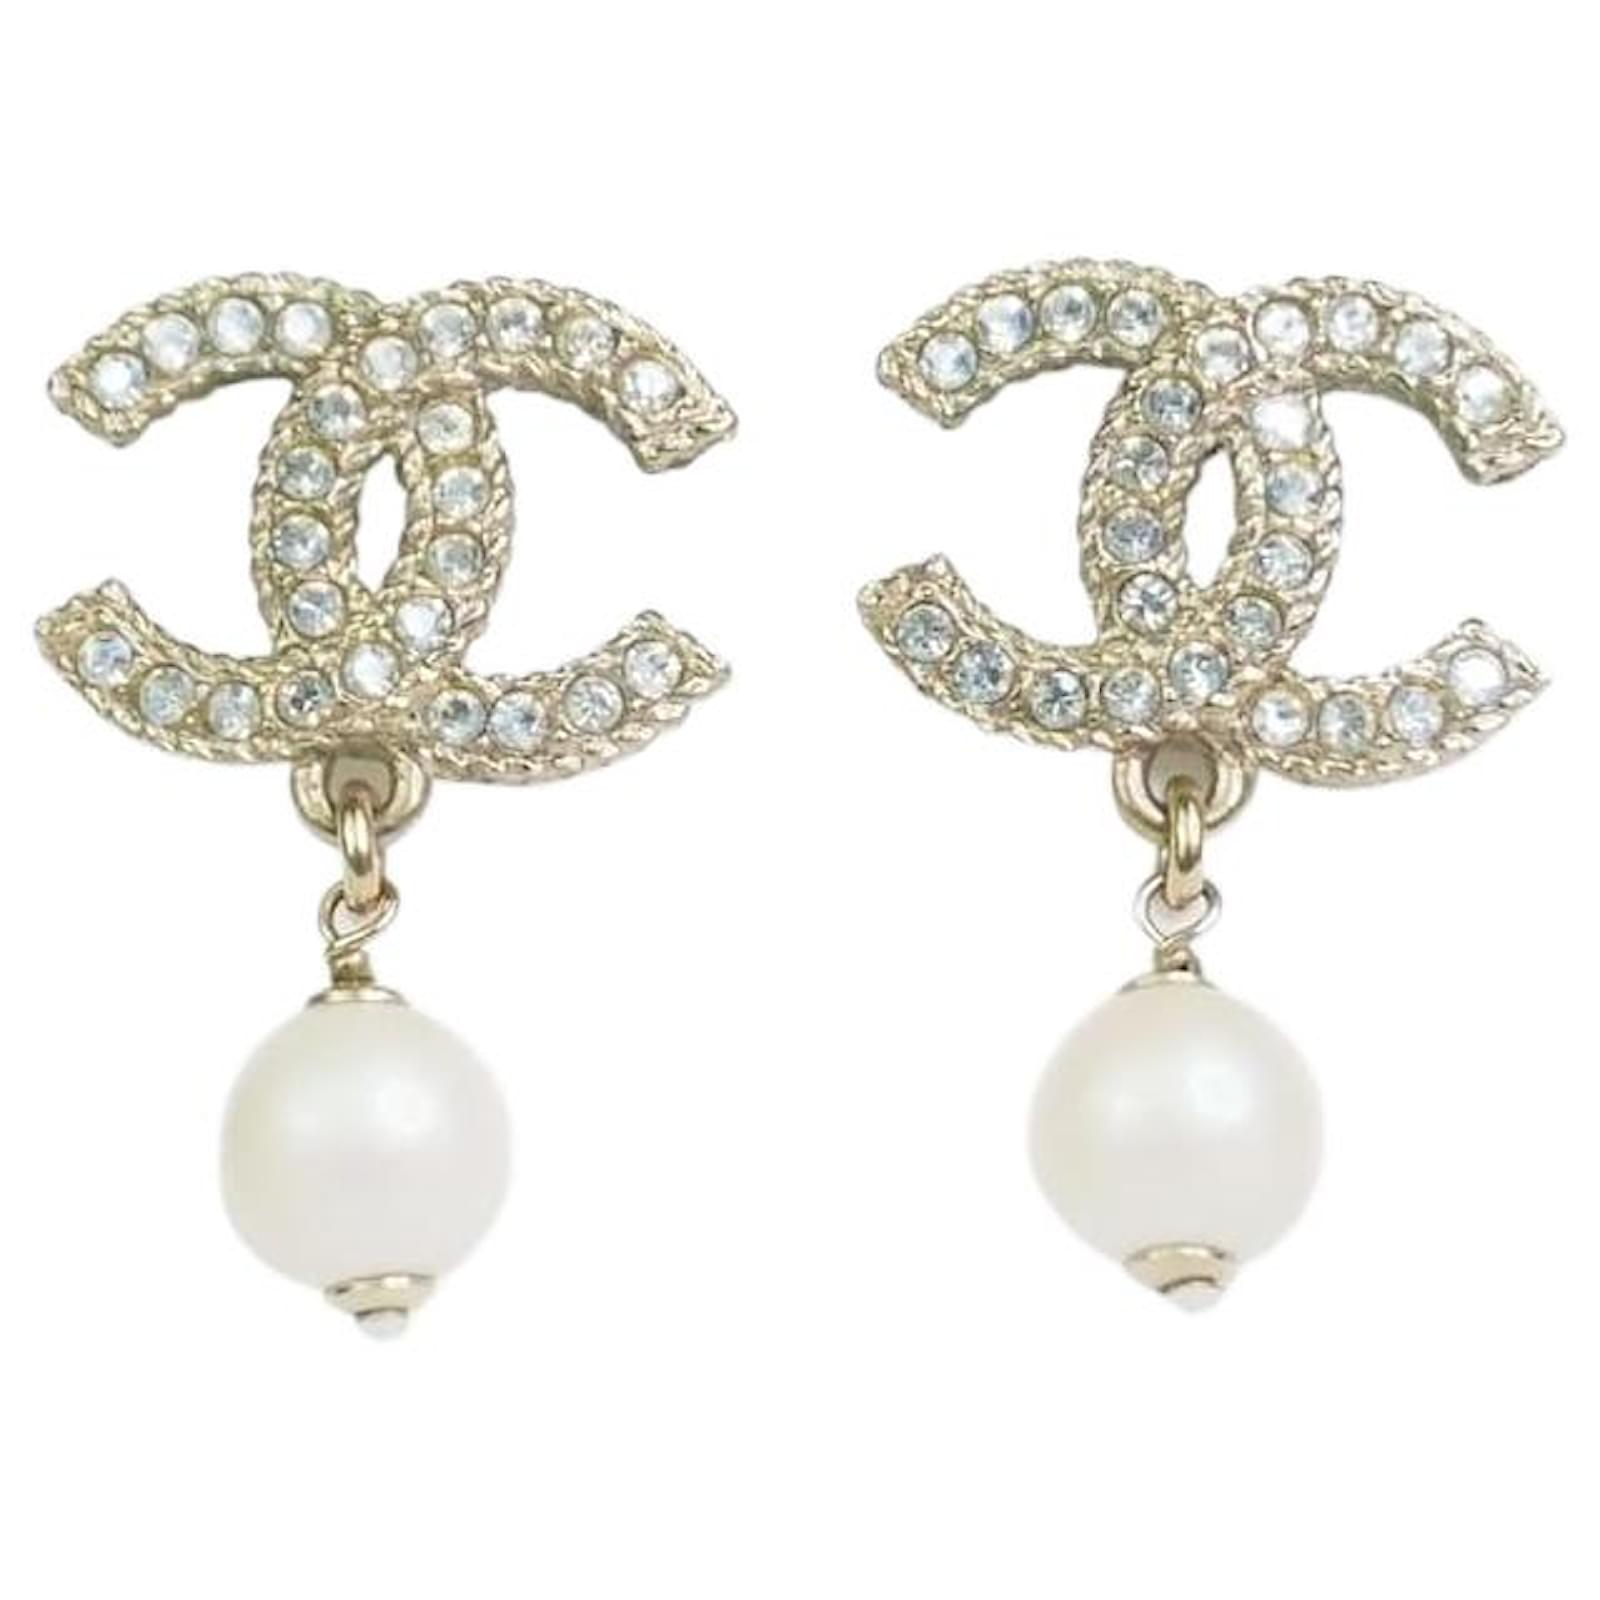 Chanel Studded Bakelite Pearl Clip-On Earrings - 2 Pieces